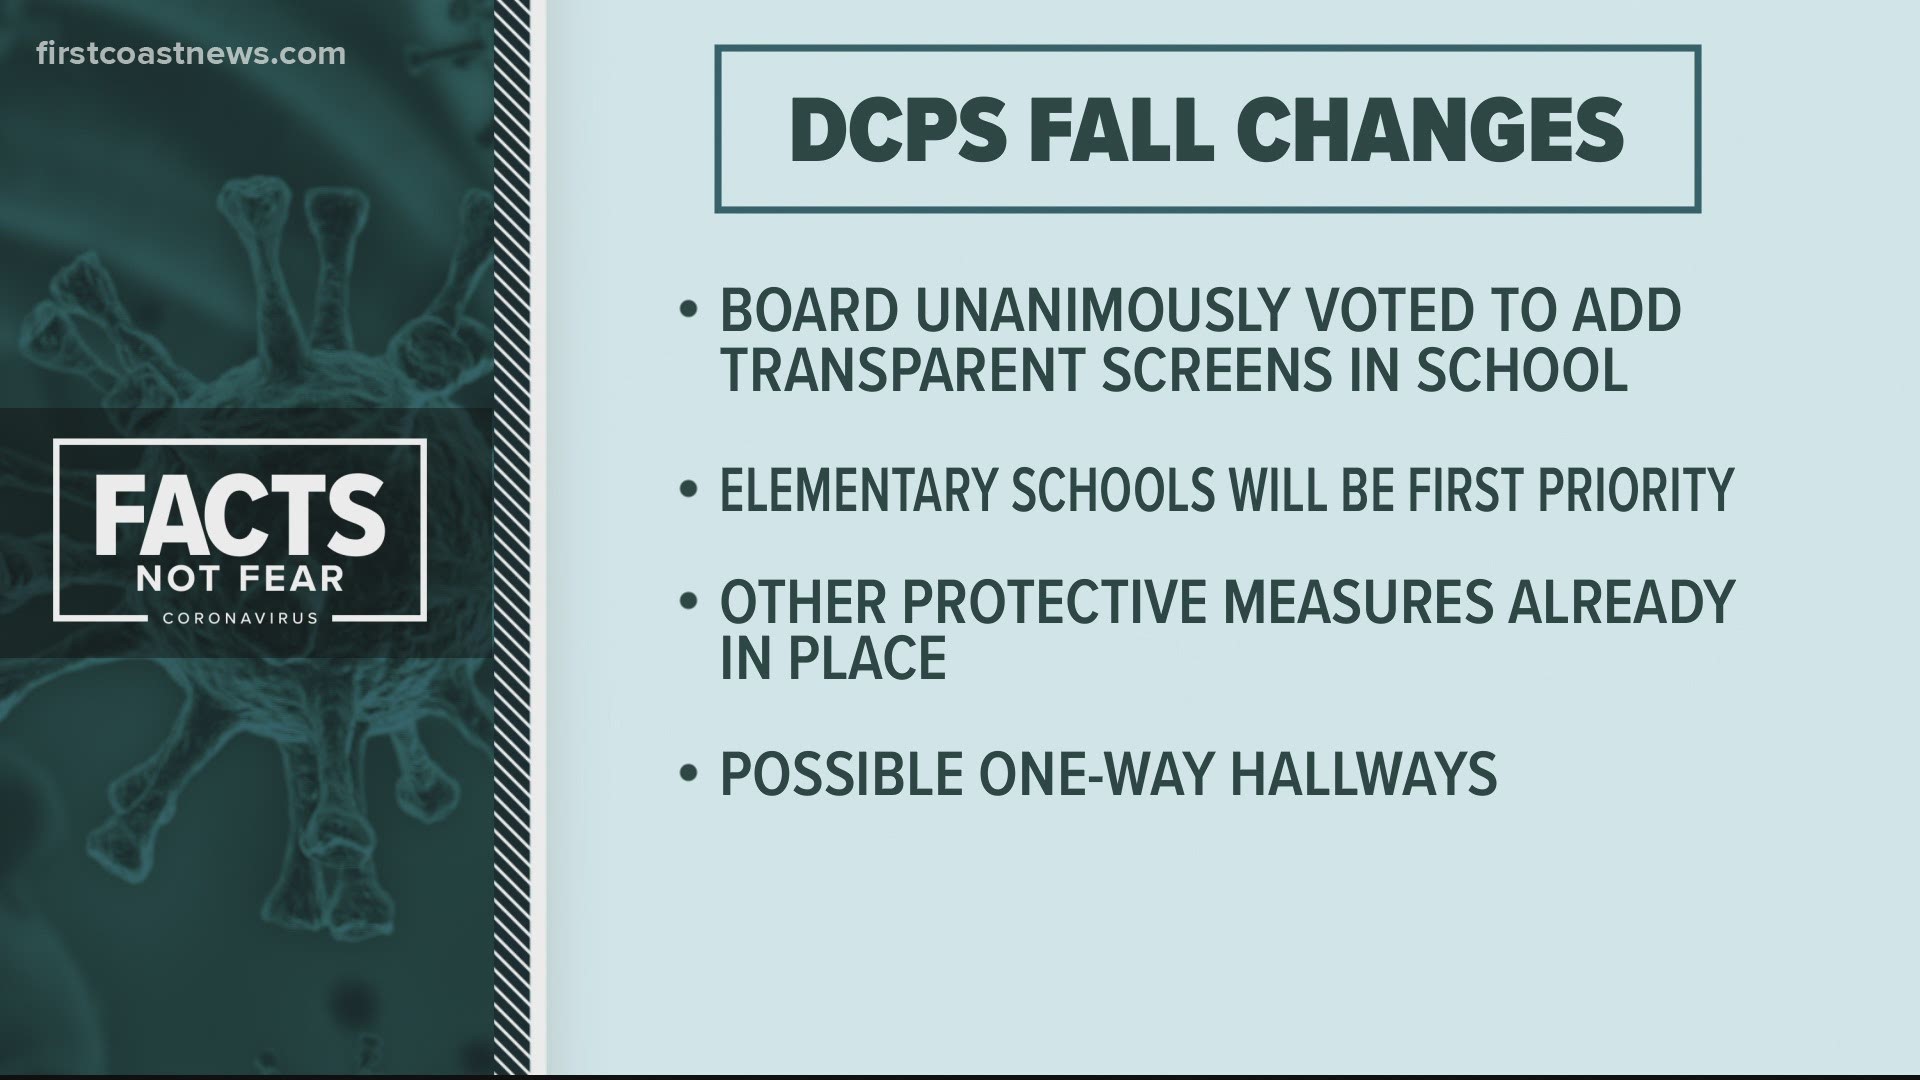 The district says the use of transparent screens would allow students to remove masks from their faces for the majority of the school day.